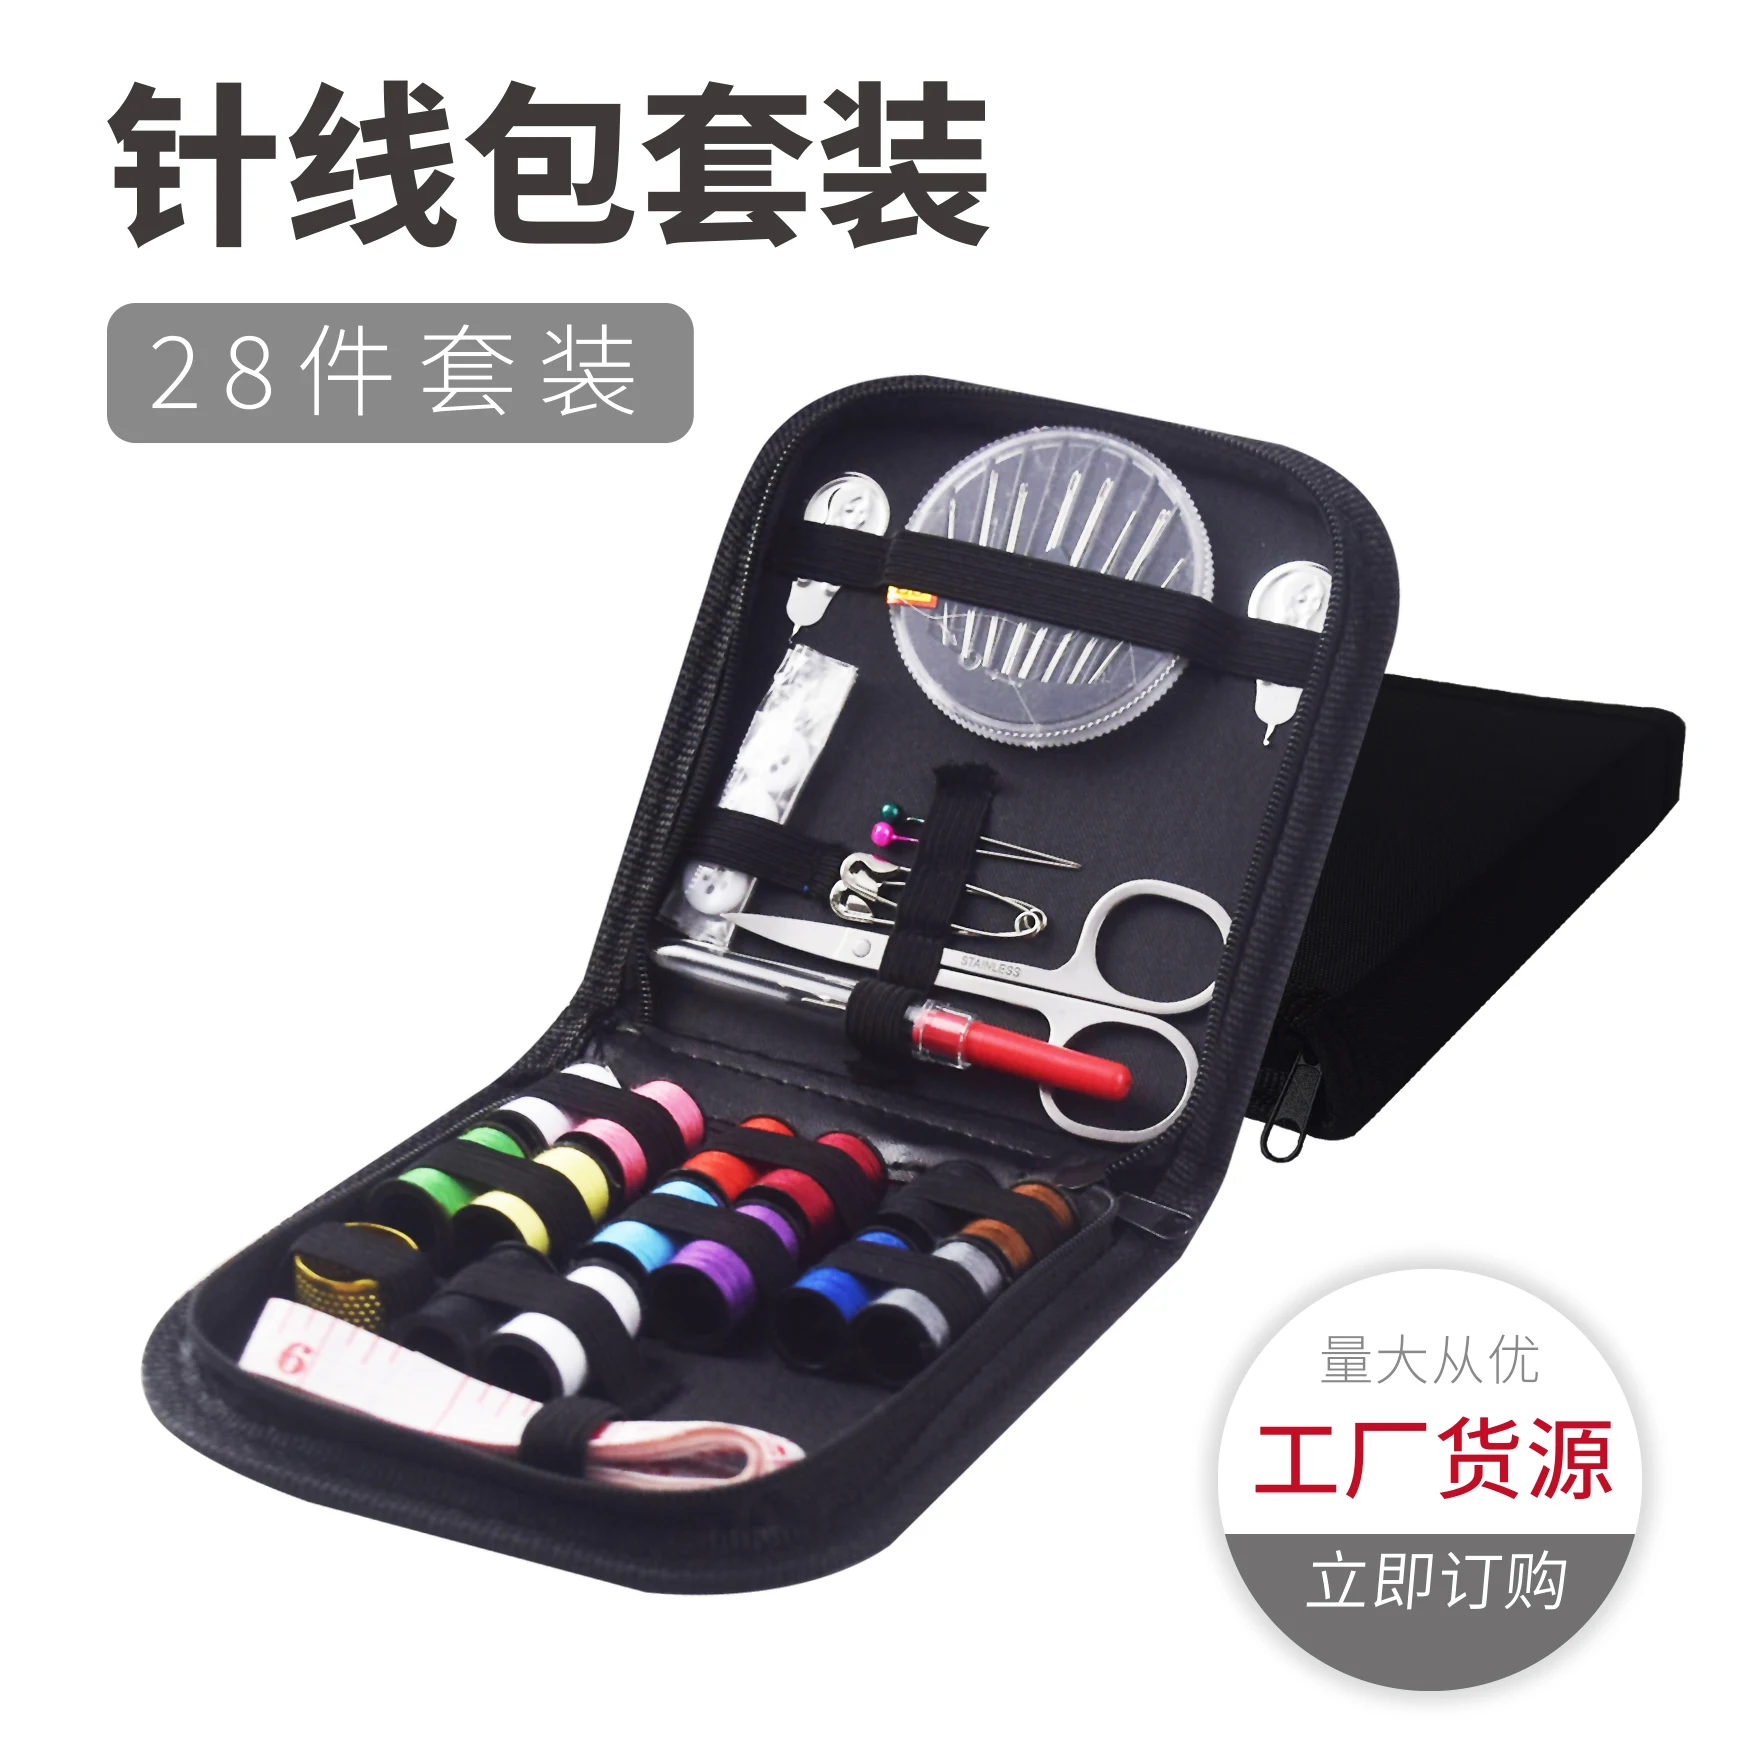 DIY 28pcs Sewing kit for Adults Beginners Home Portable Sewing Kit with Scissors Thimble Thread Needles Sewing Supplies set